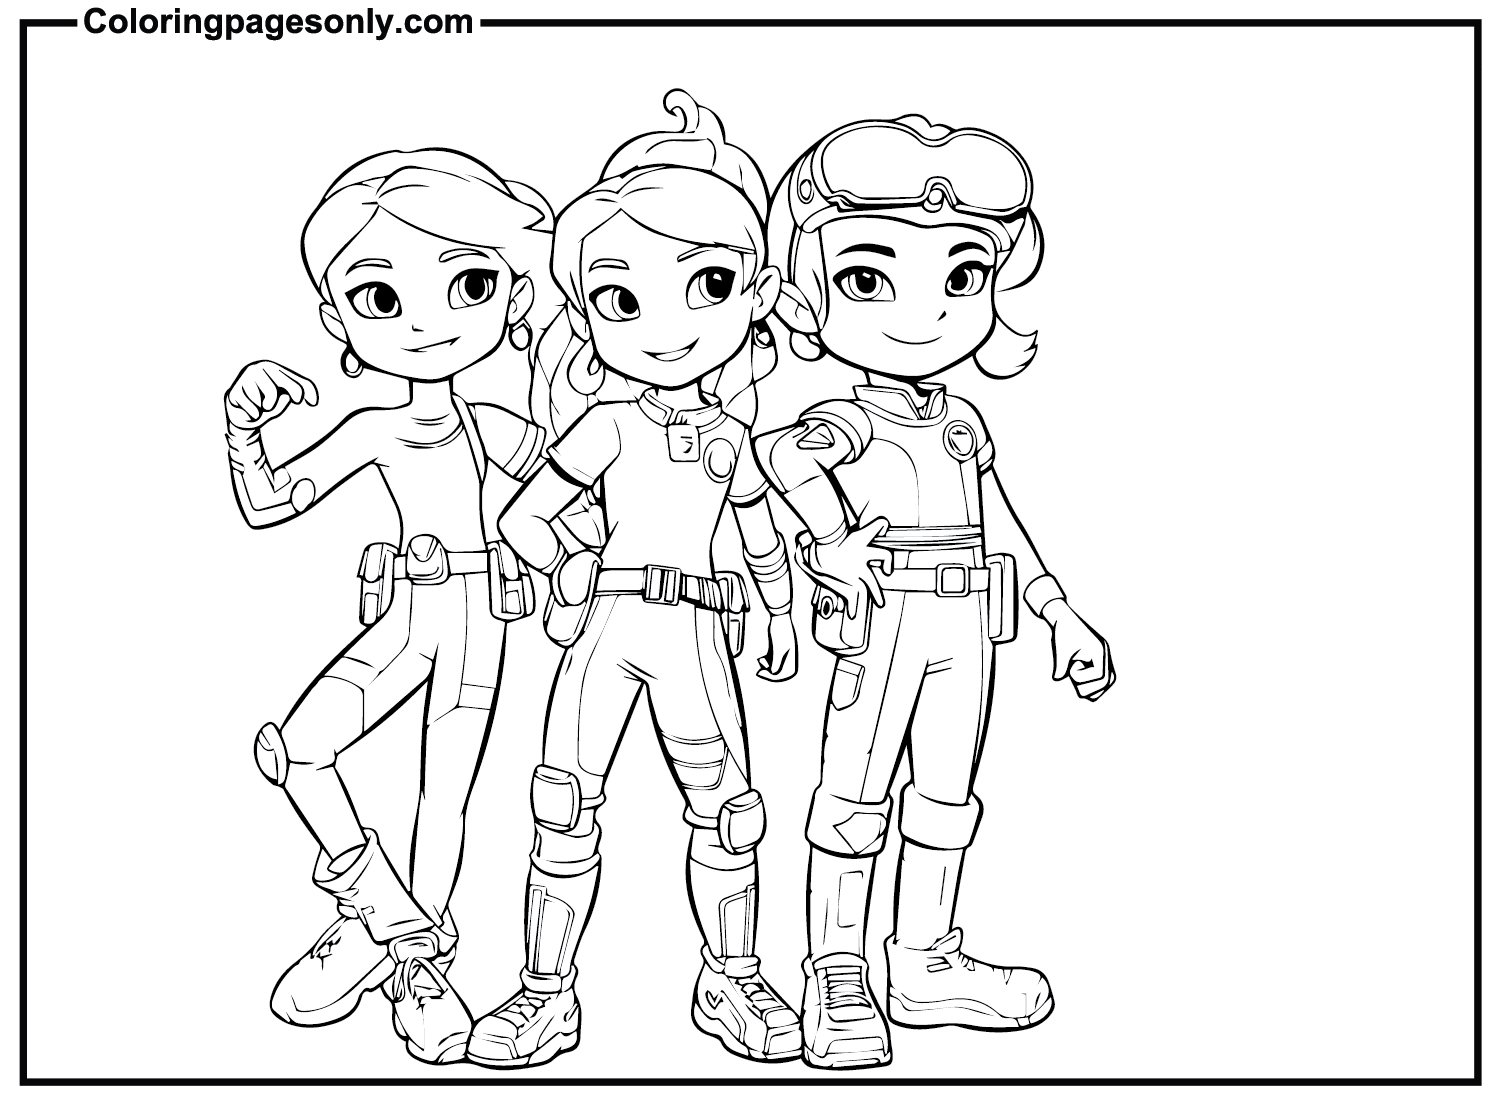 Rainbow Rangers Characters Coloring Pages